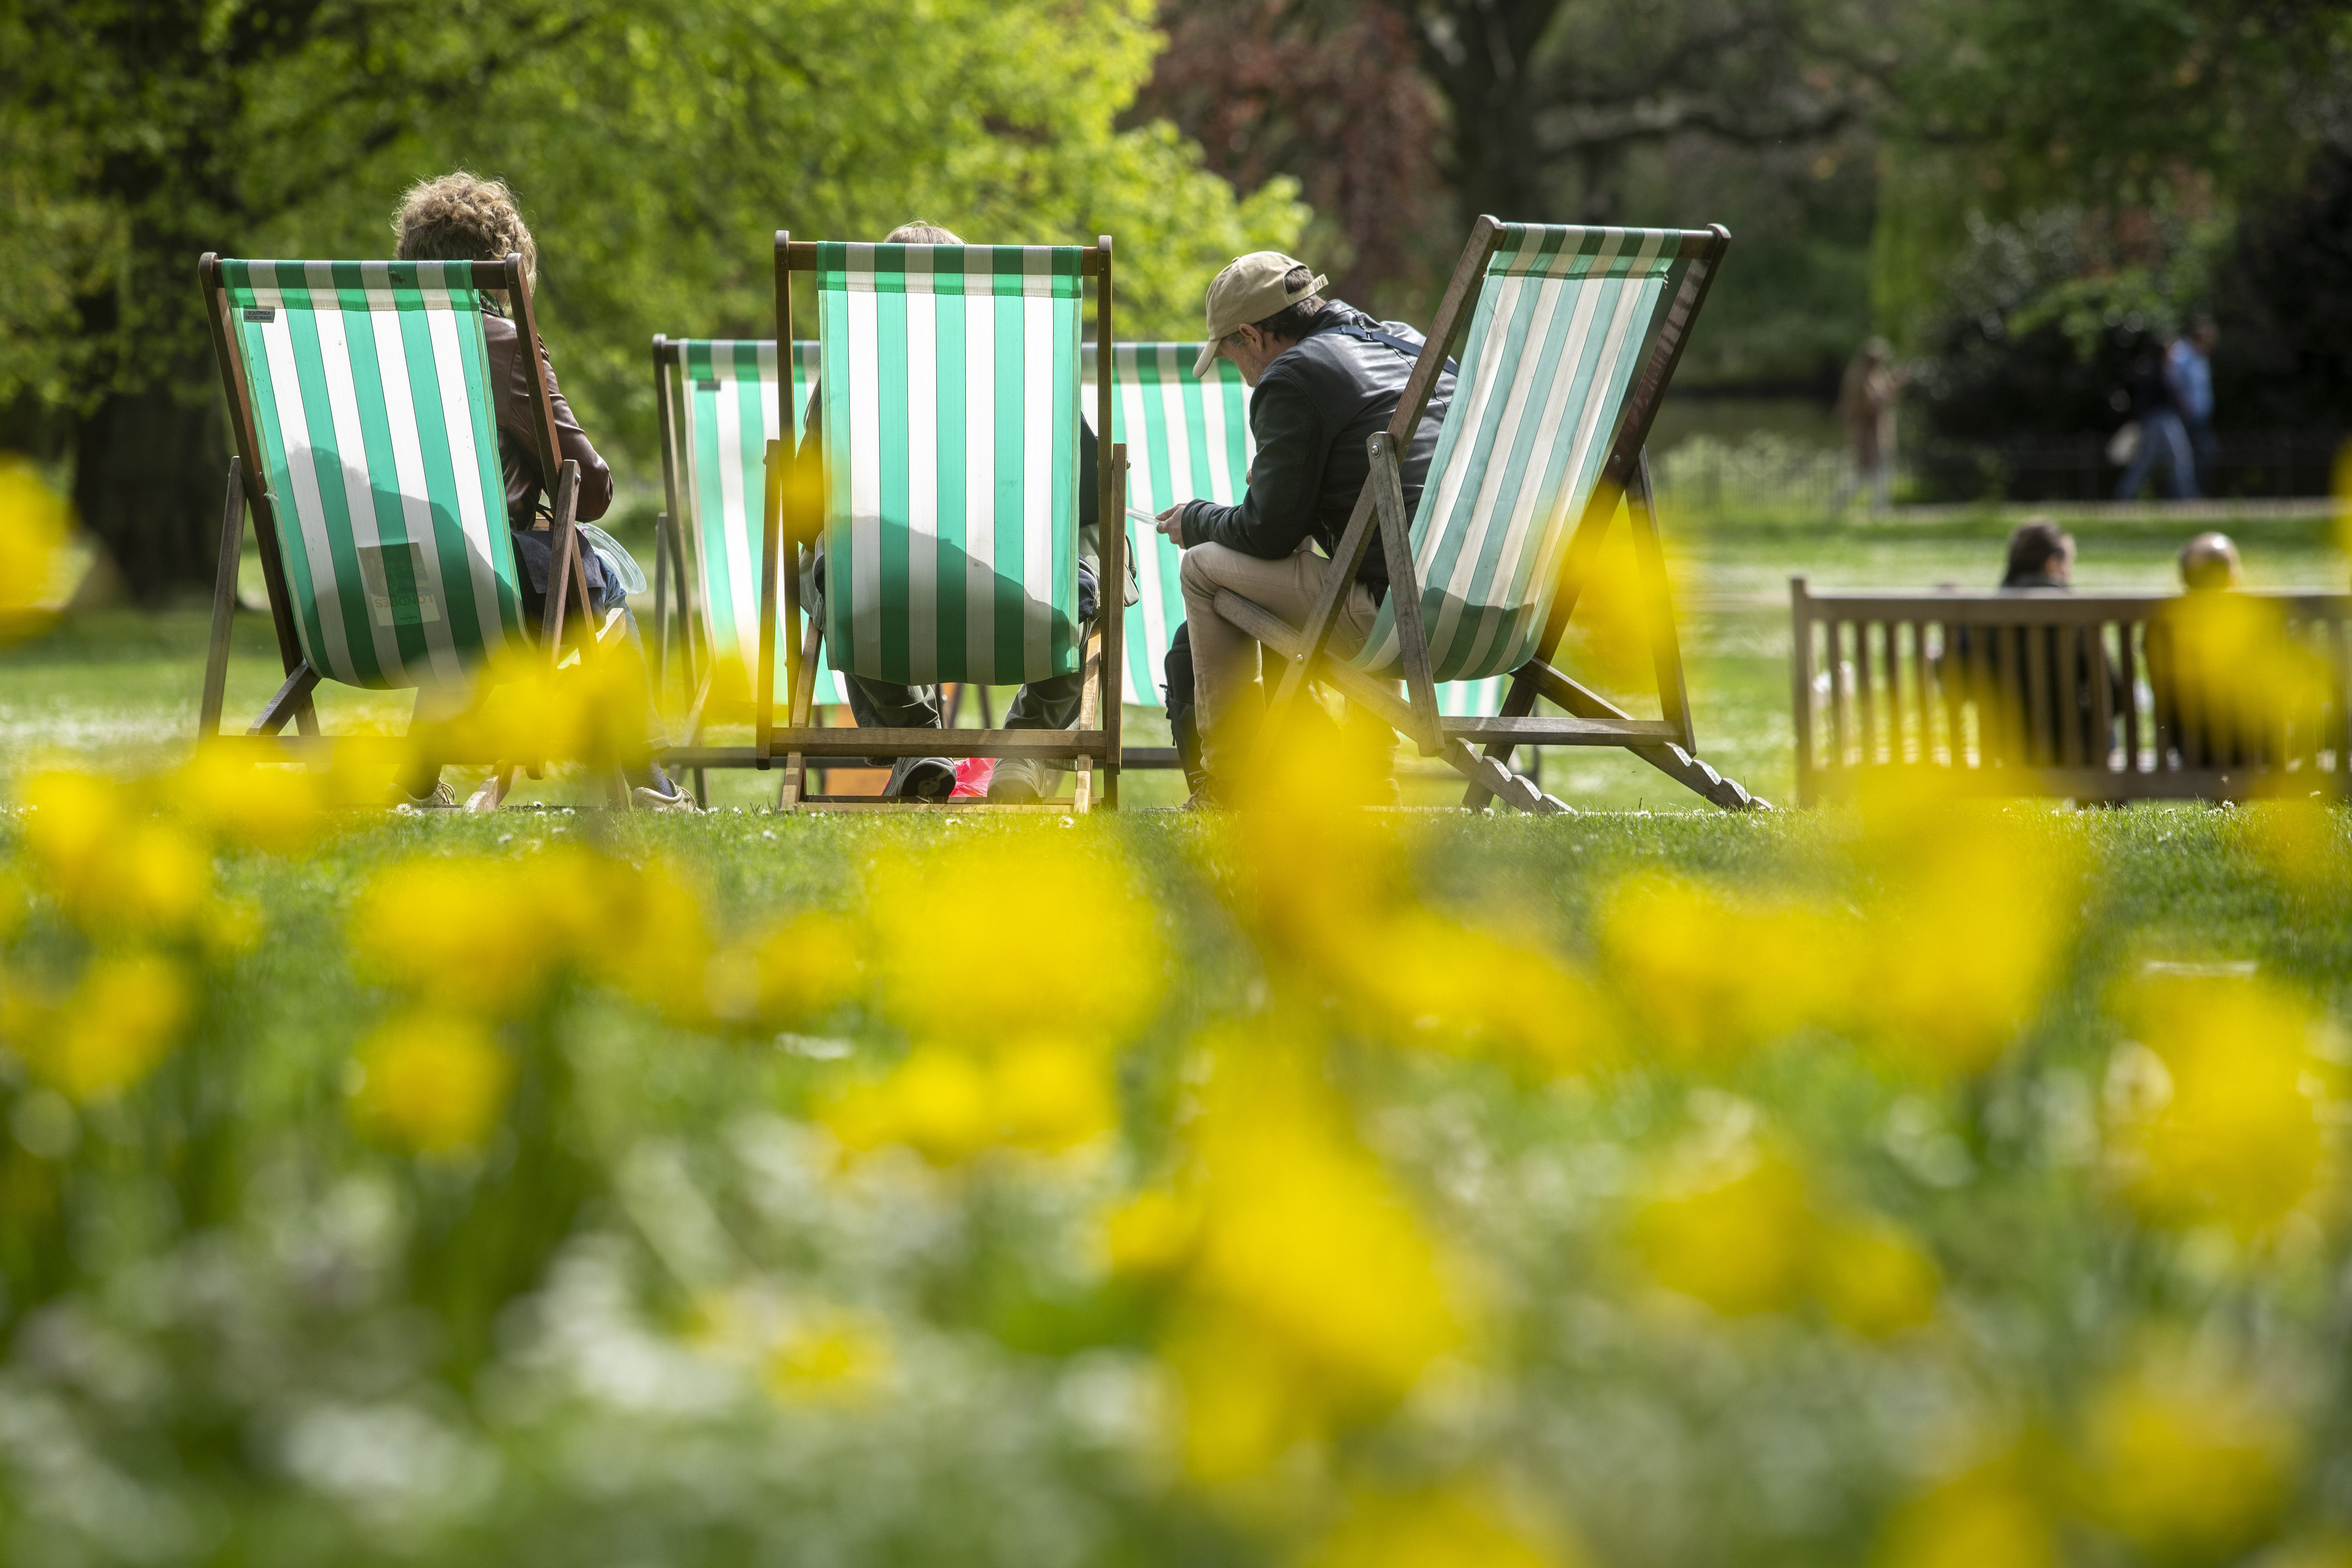 People make use of deckchairs at St James’s Park in central London